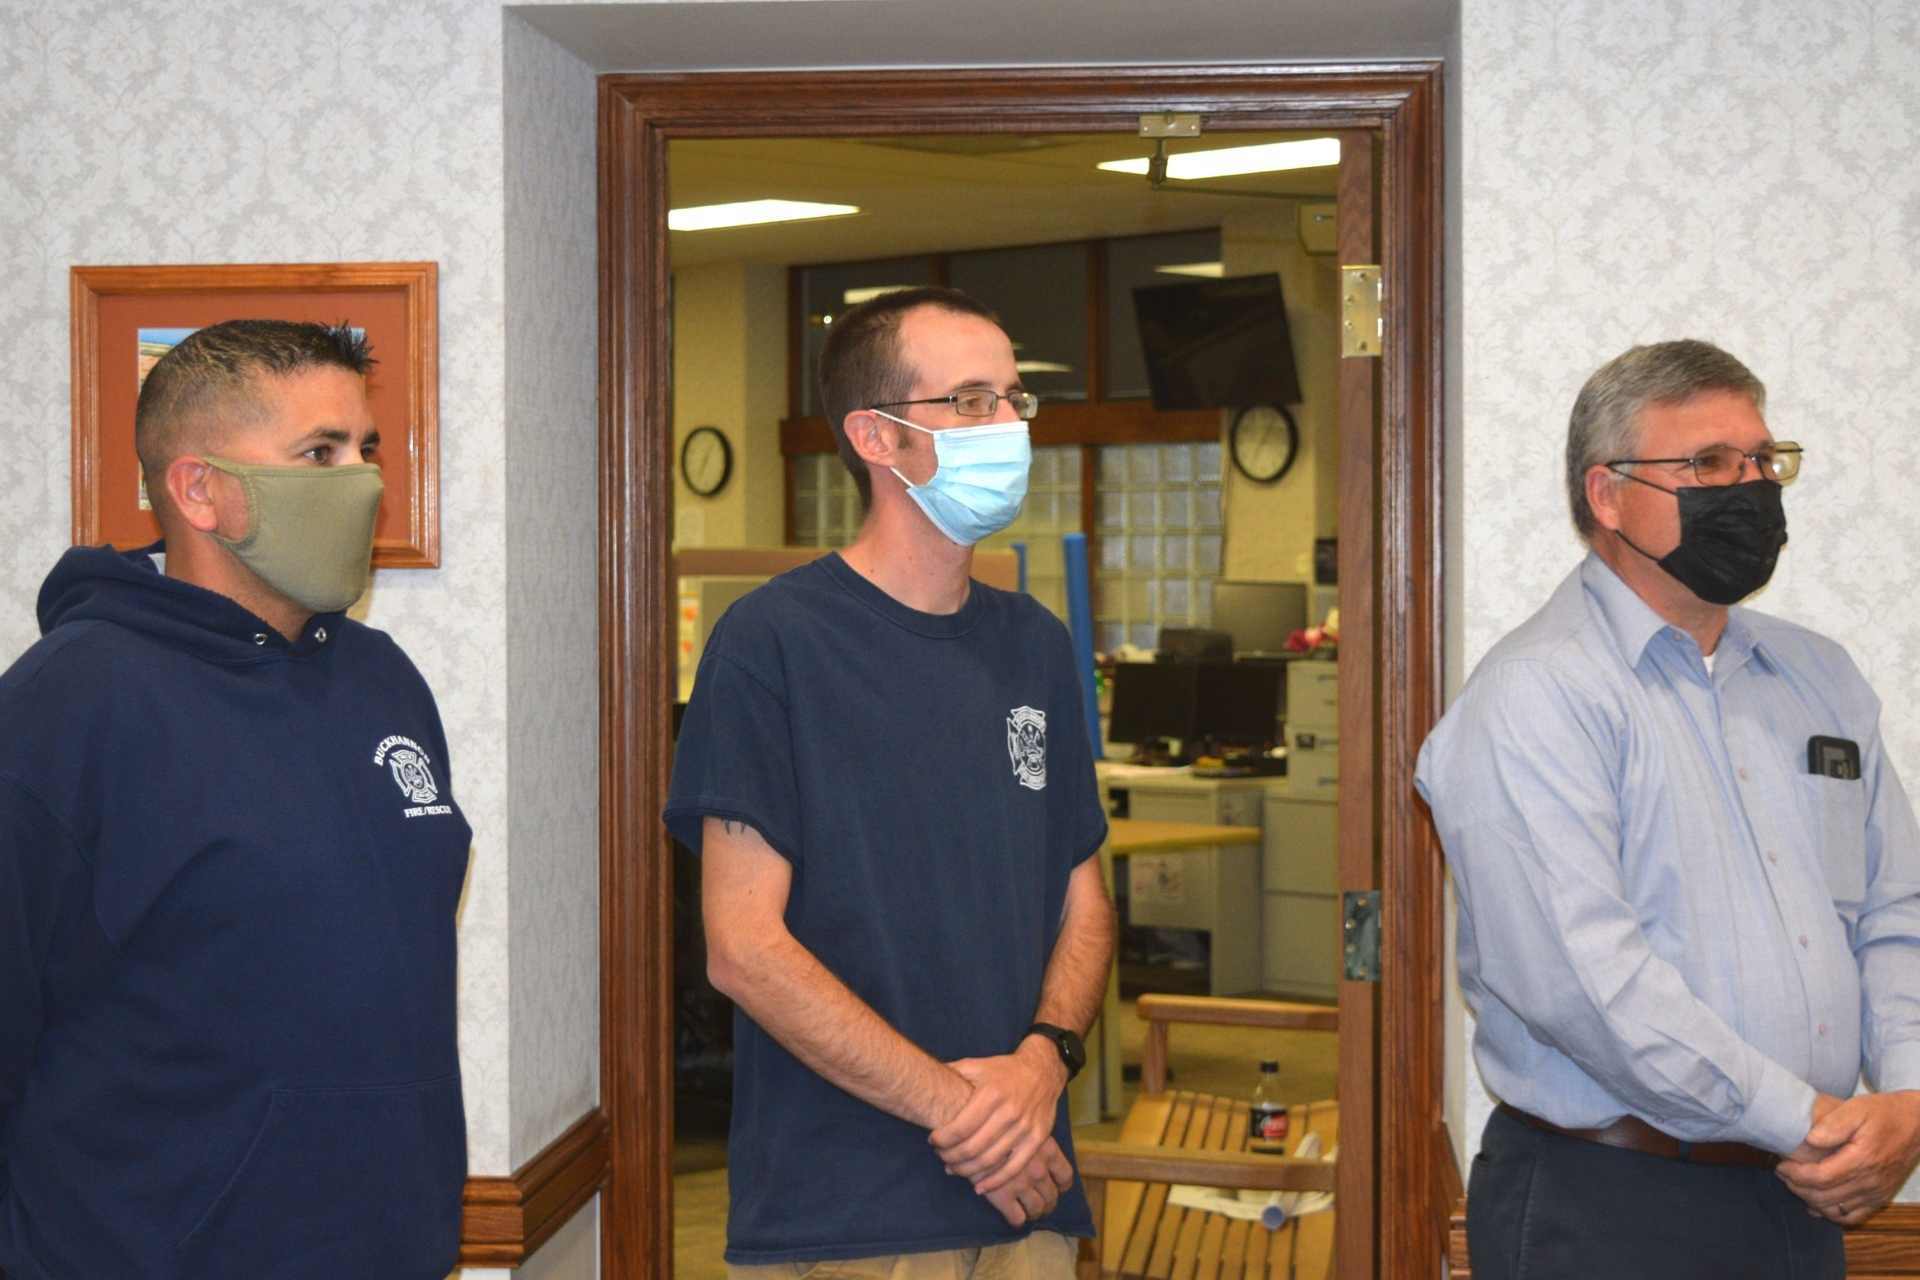 Three volunteers with the Buckhannon Fire Department spoke during the May 6 Buckhannon City Council meeting showing their support for the addition of three full-time paid firefighters. Pictured are Glen Davis, Travis Dean and Brian Chidester.